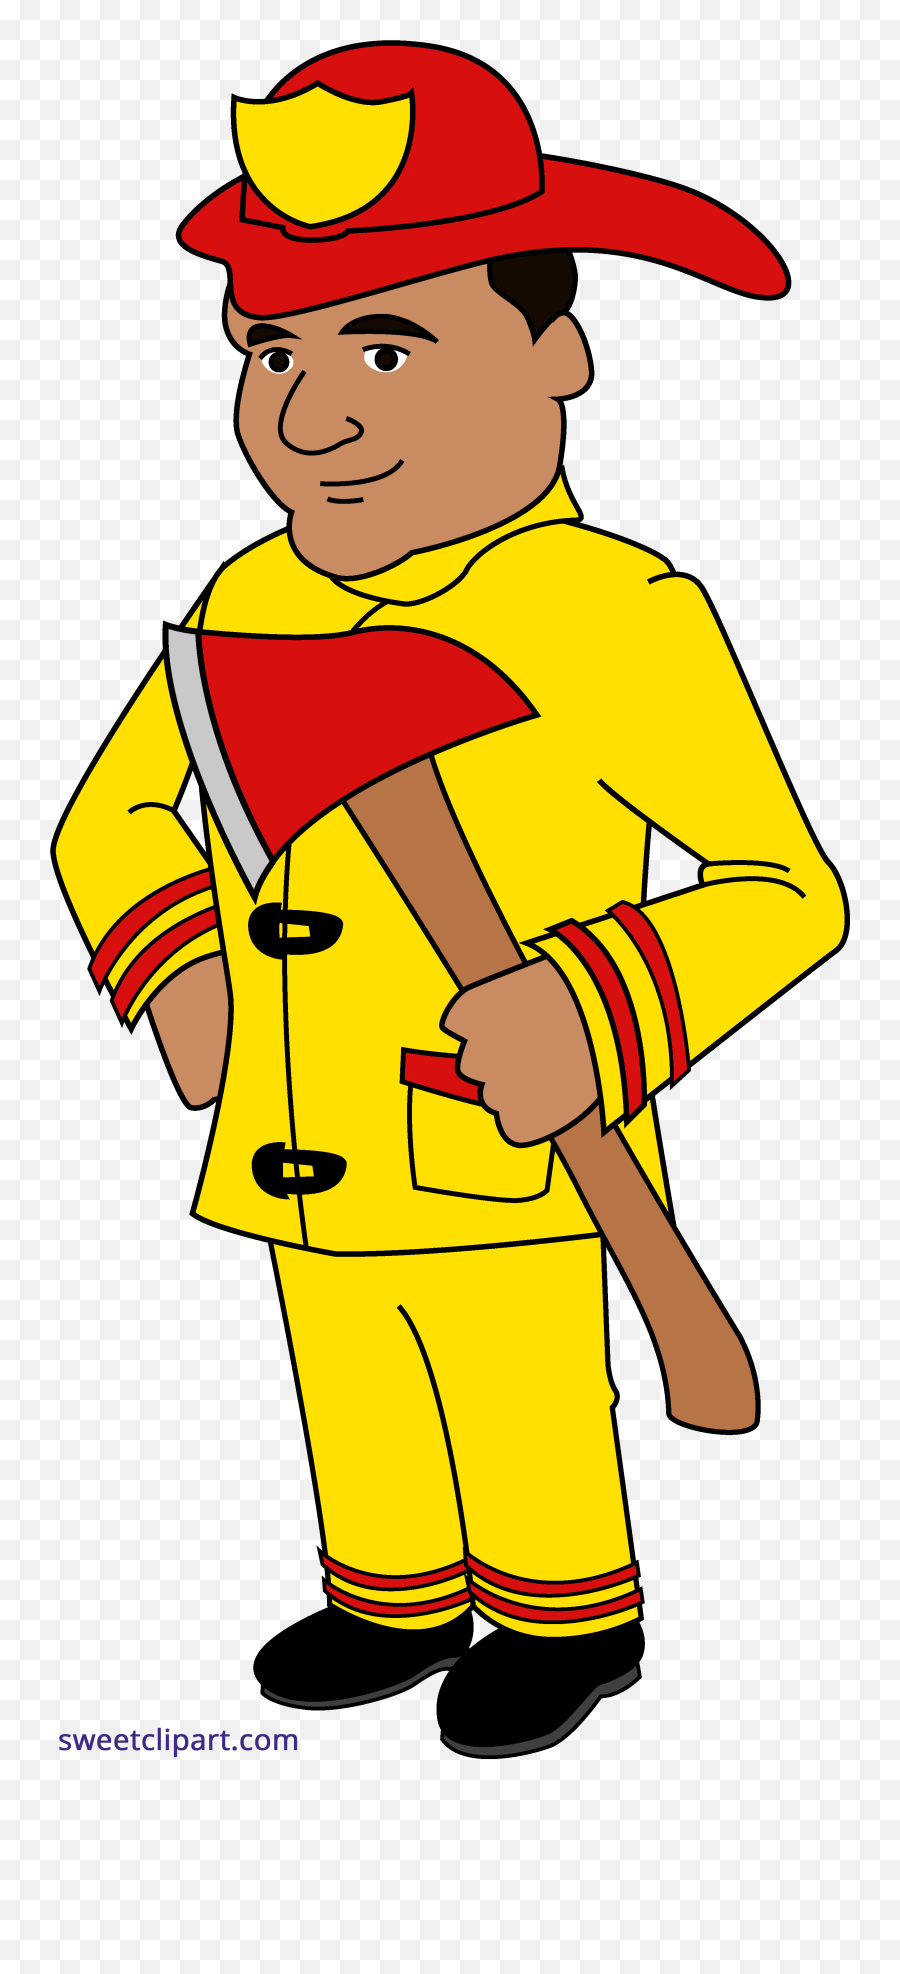 Firefighter Clipart Png 2 Image - Cartoon Firefighter Clip Art Free,Firefighter Png